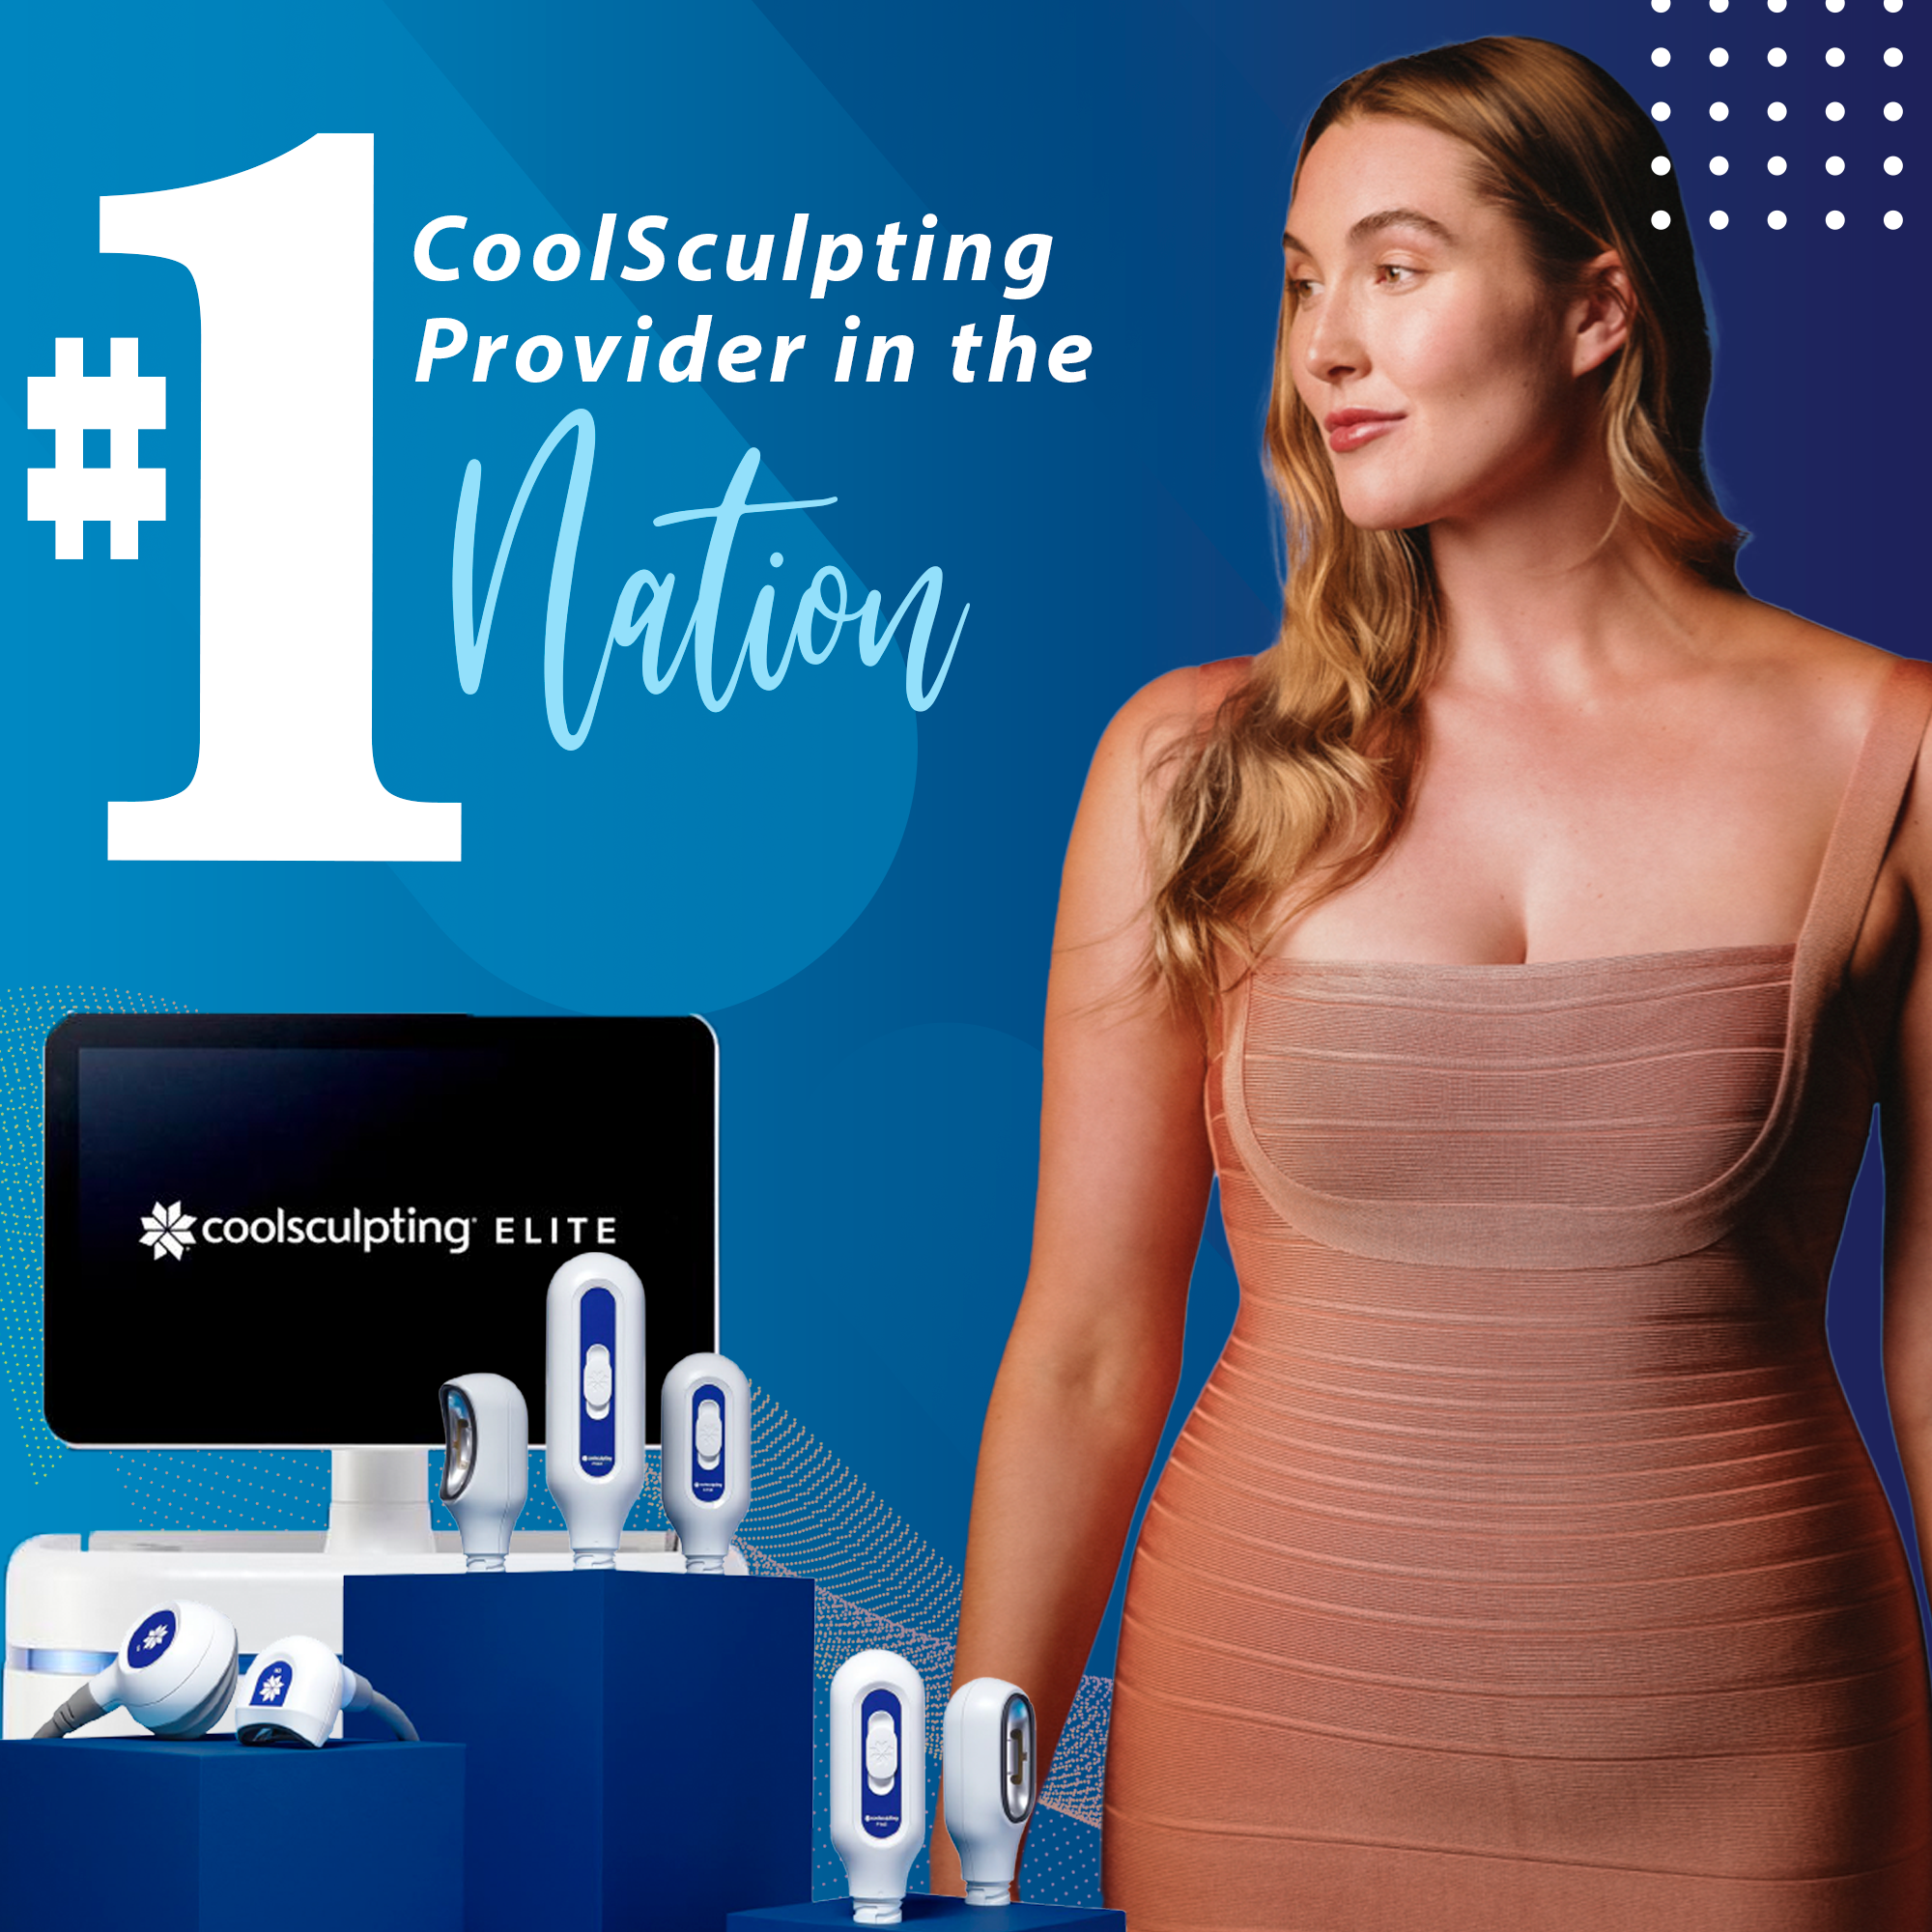 Bodenvy best place for coolsculpting near me